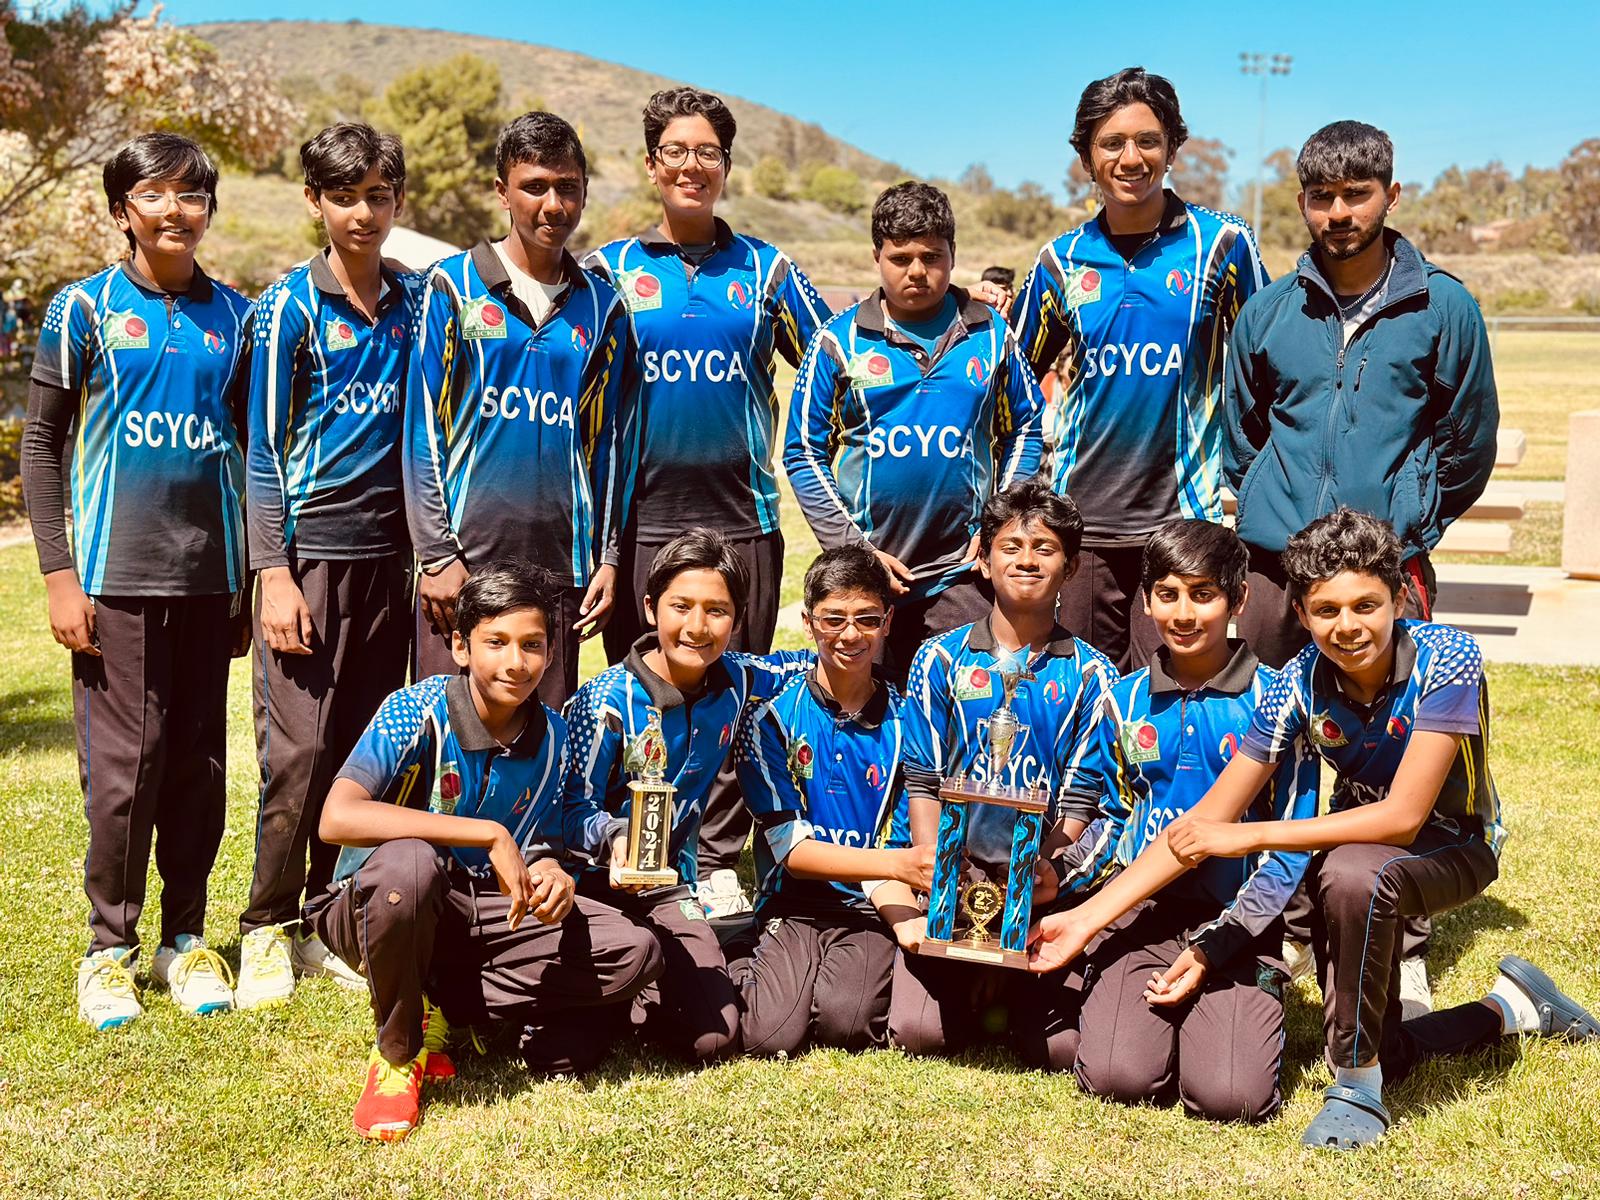 SCYCA Triumphs in U-12 and Secures Runner-Up in U-14 Categories at Memorial Day Tournament